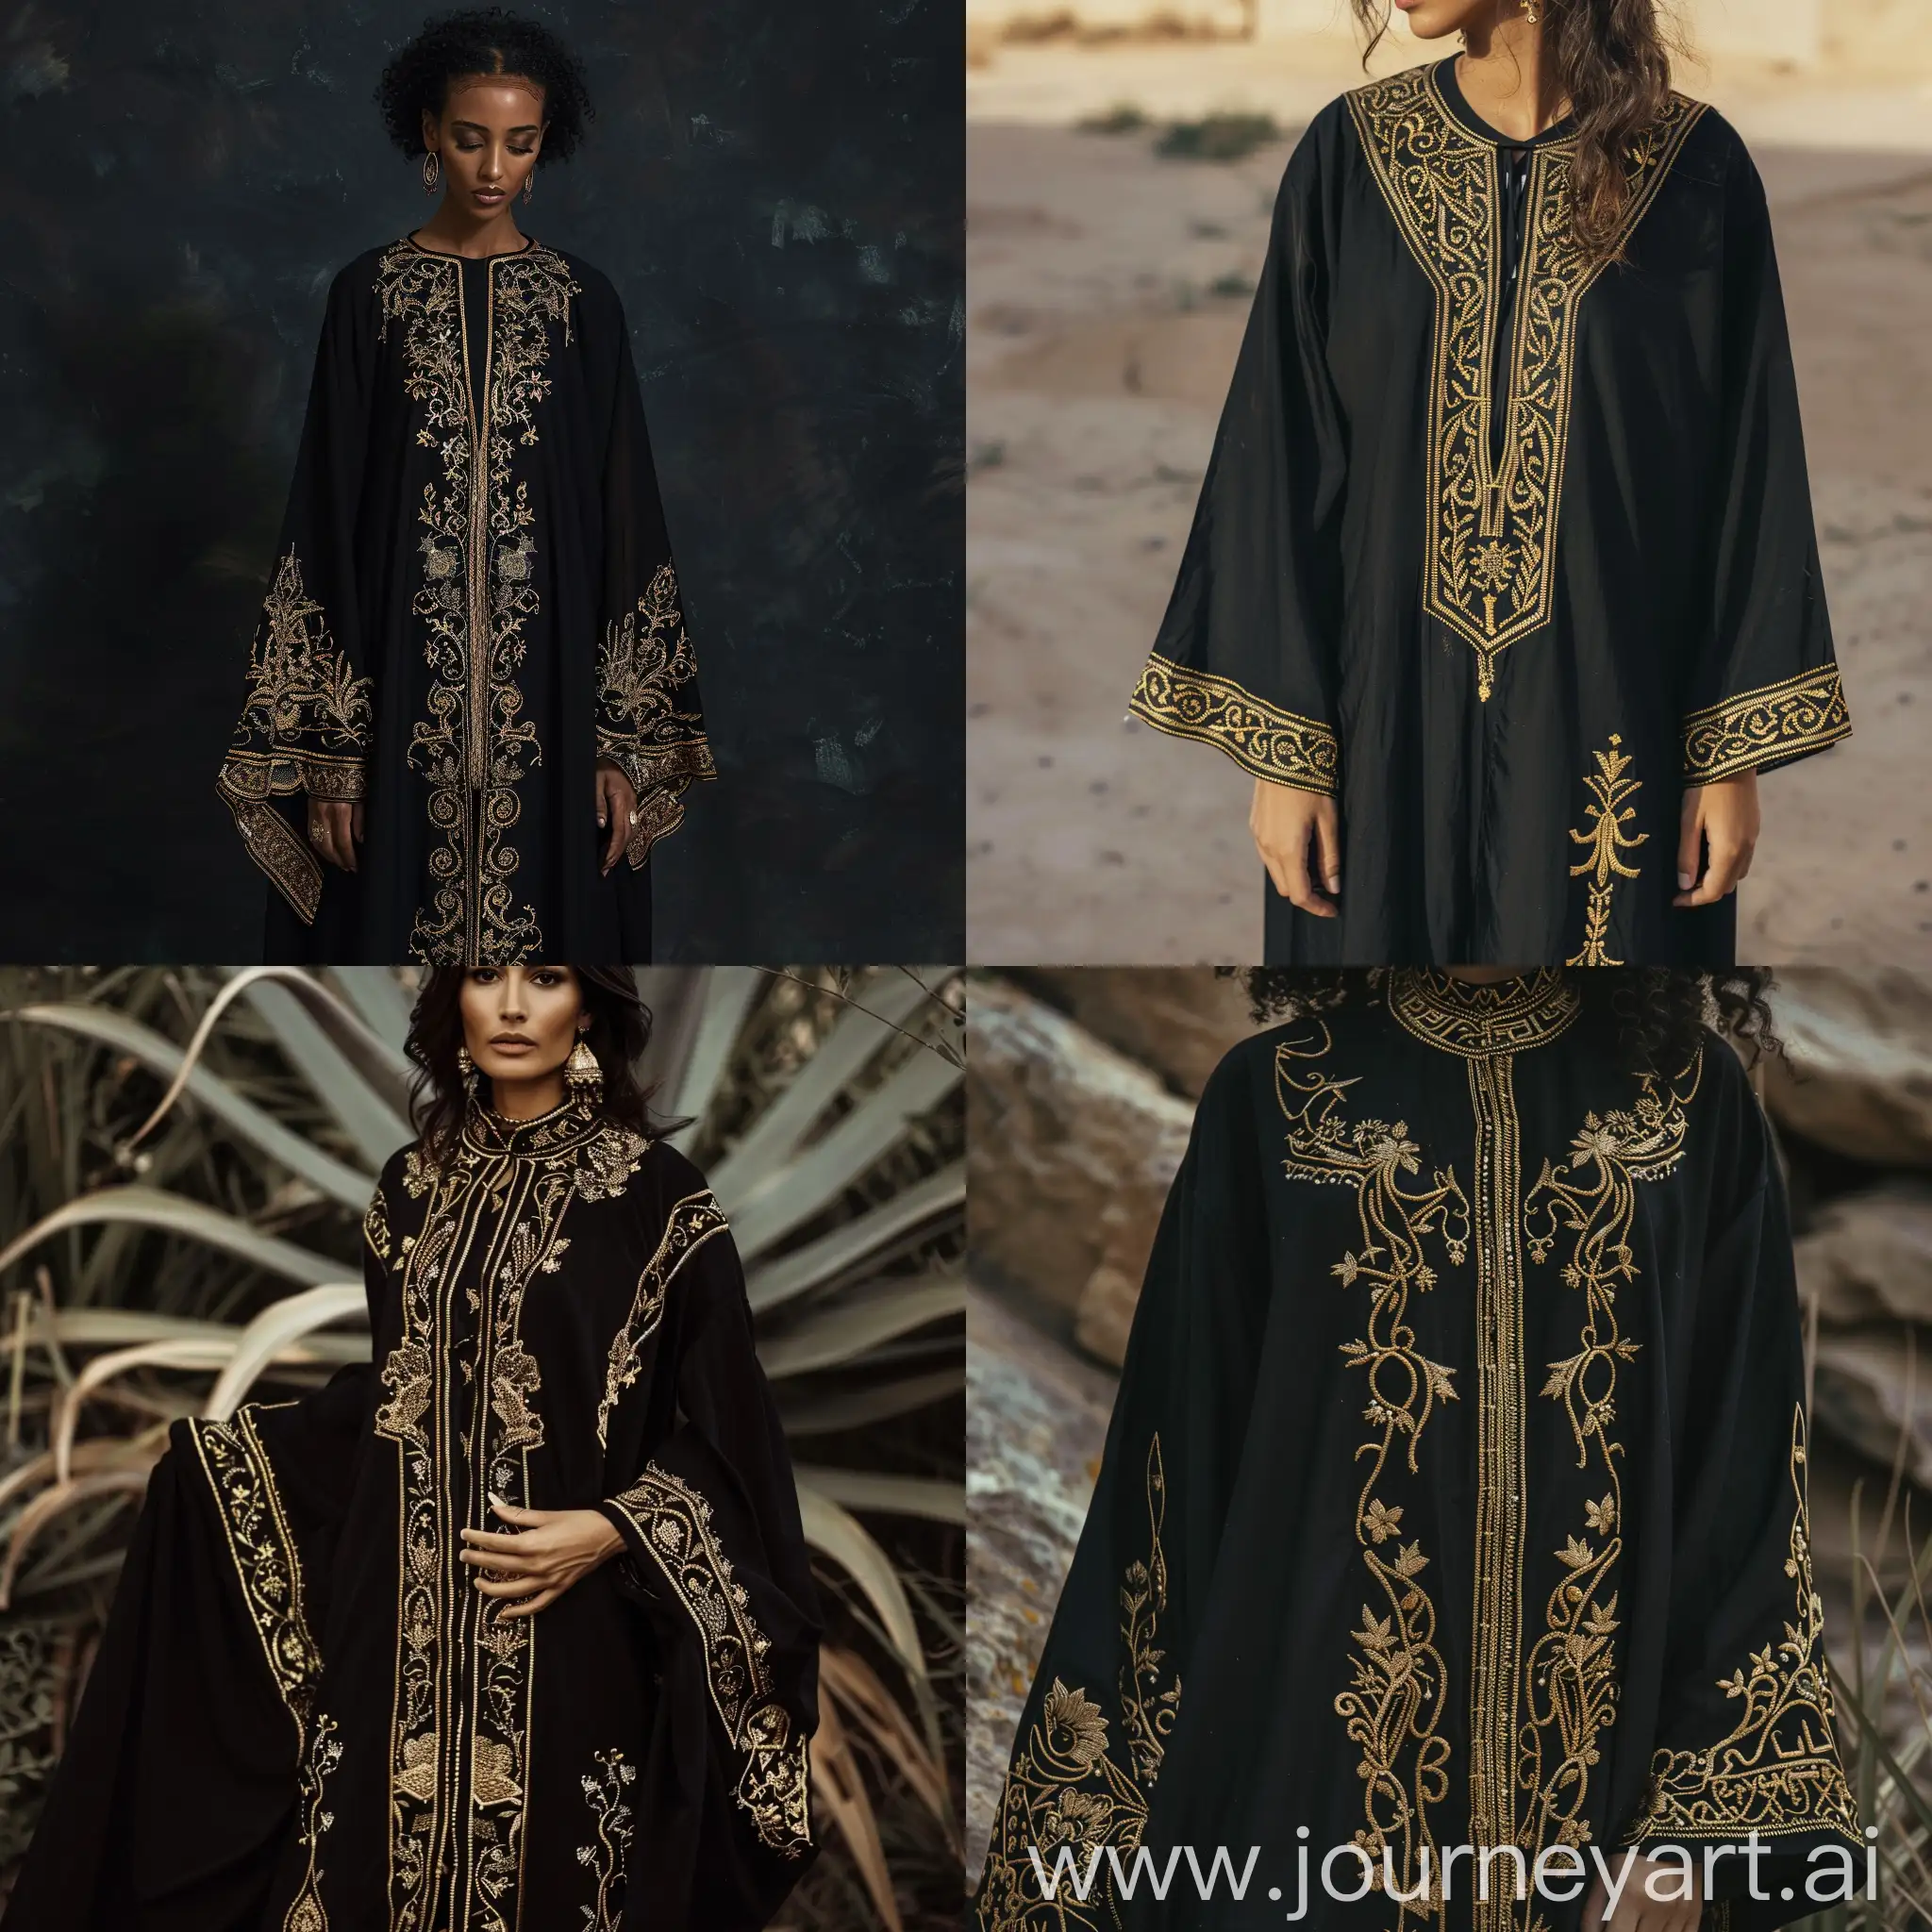 Elegant-Moroccan-Caftan-Fashion-Timeless-Style-in-Black-and-Gold